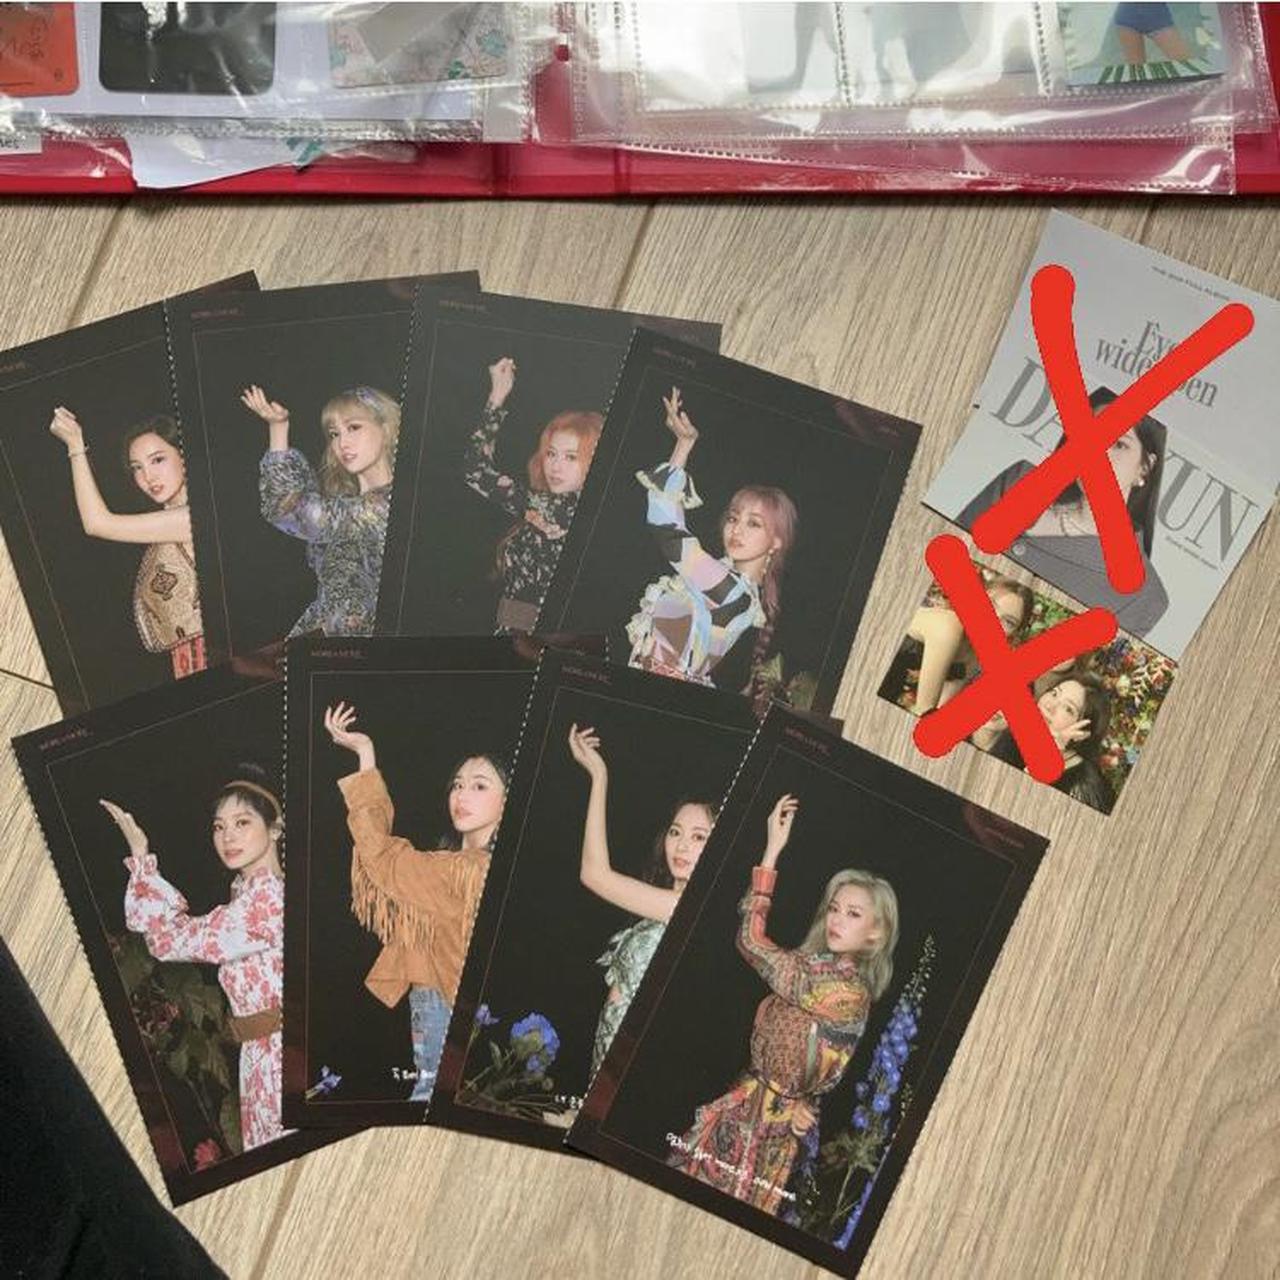 Product Image 1 - ONLY POSTCARDS AVAILABLE 
KPOP TWICE